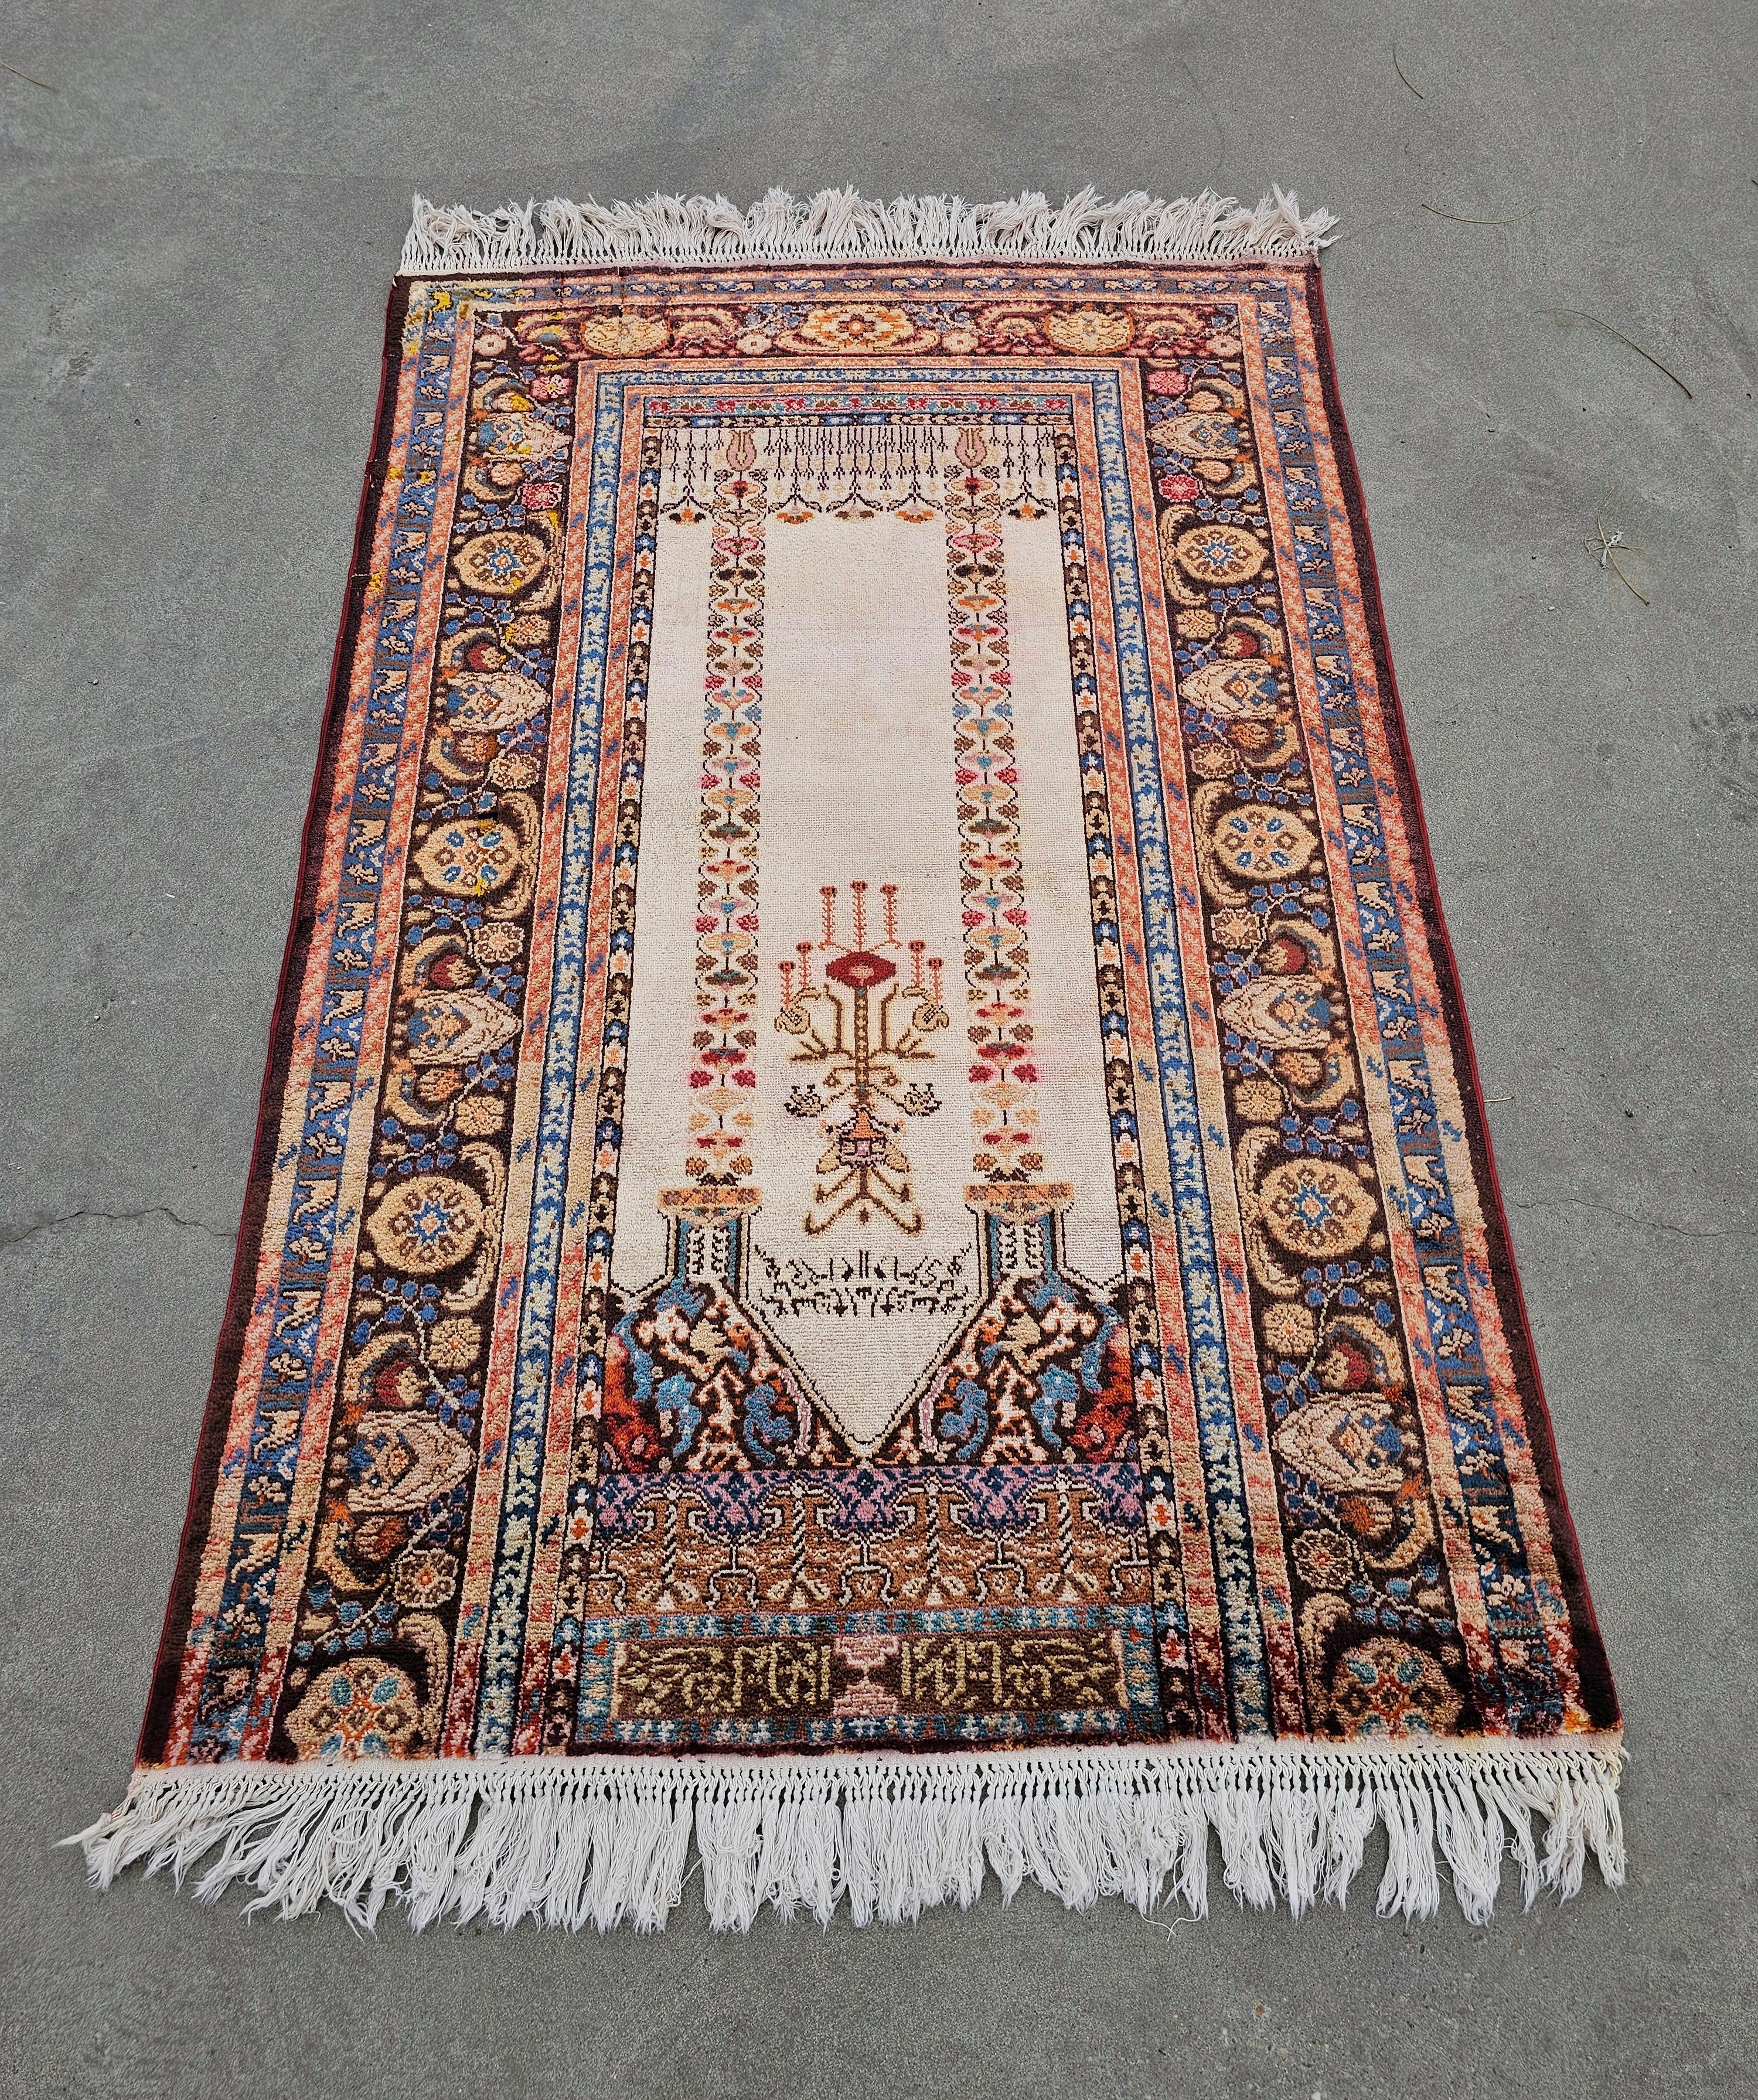 In this listing you will find a spectacular vintage Western Anatolian hand-knotted silk prayer rug. This Panderma rug features a Mihrab design pattern, with writings, and beautiful colors of cream, purple, burgundy blue and orange, is hand-knotted